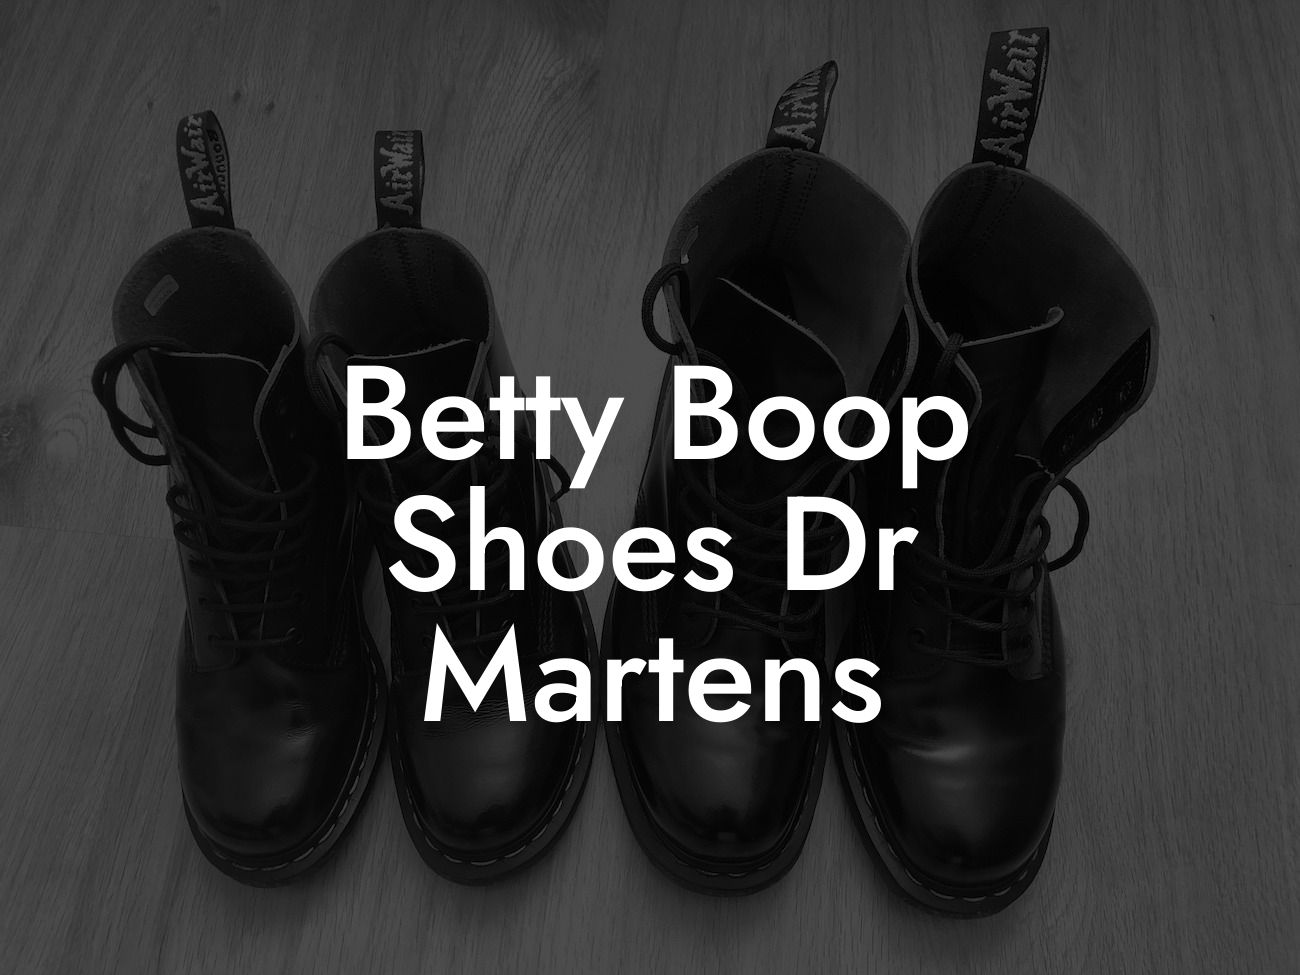 Betty Boop Shoes Dr Martens